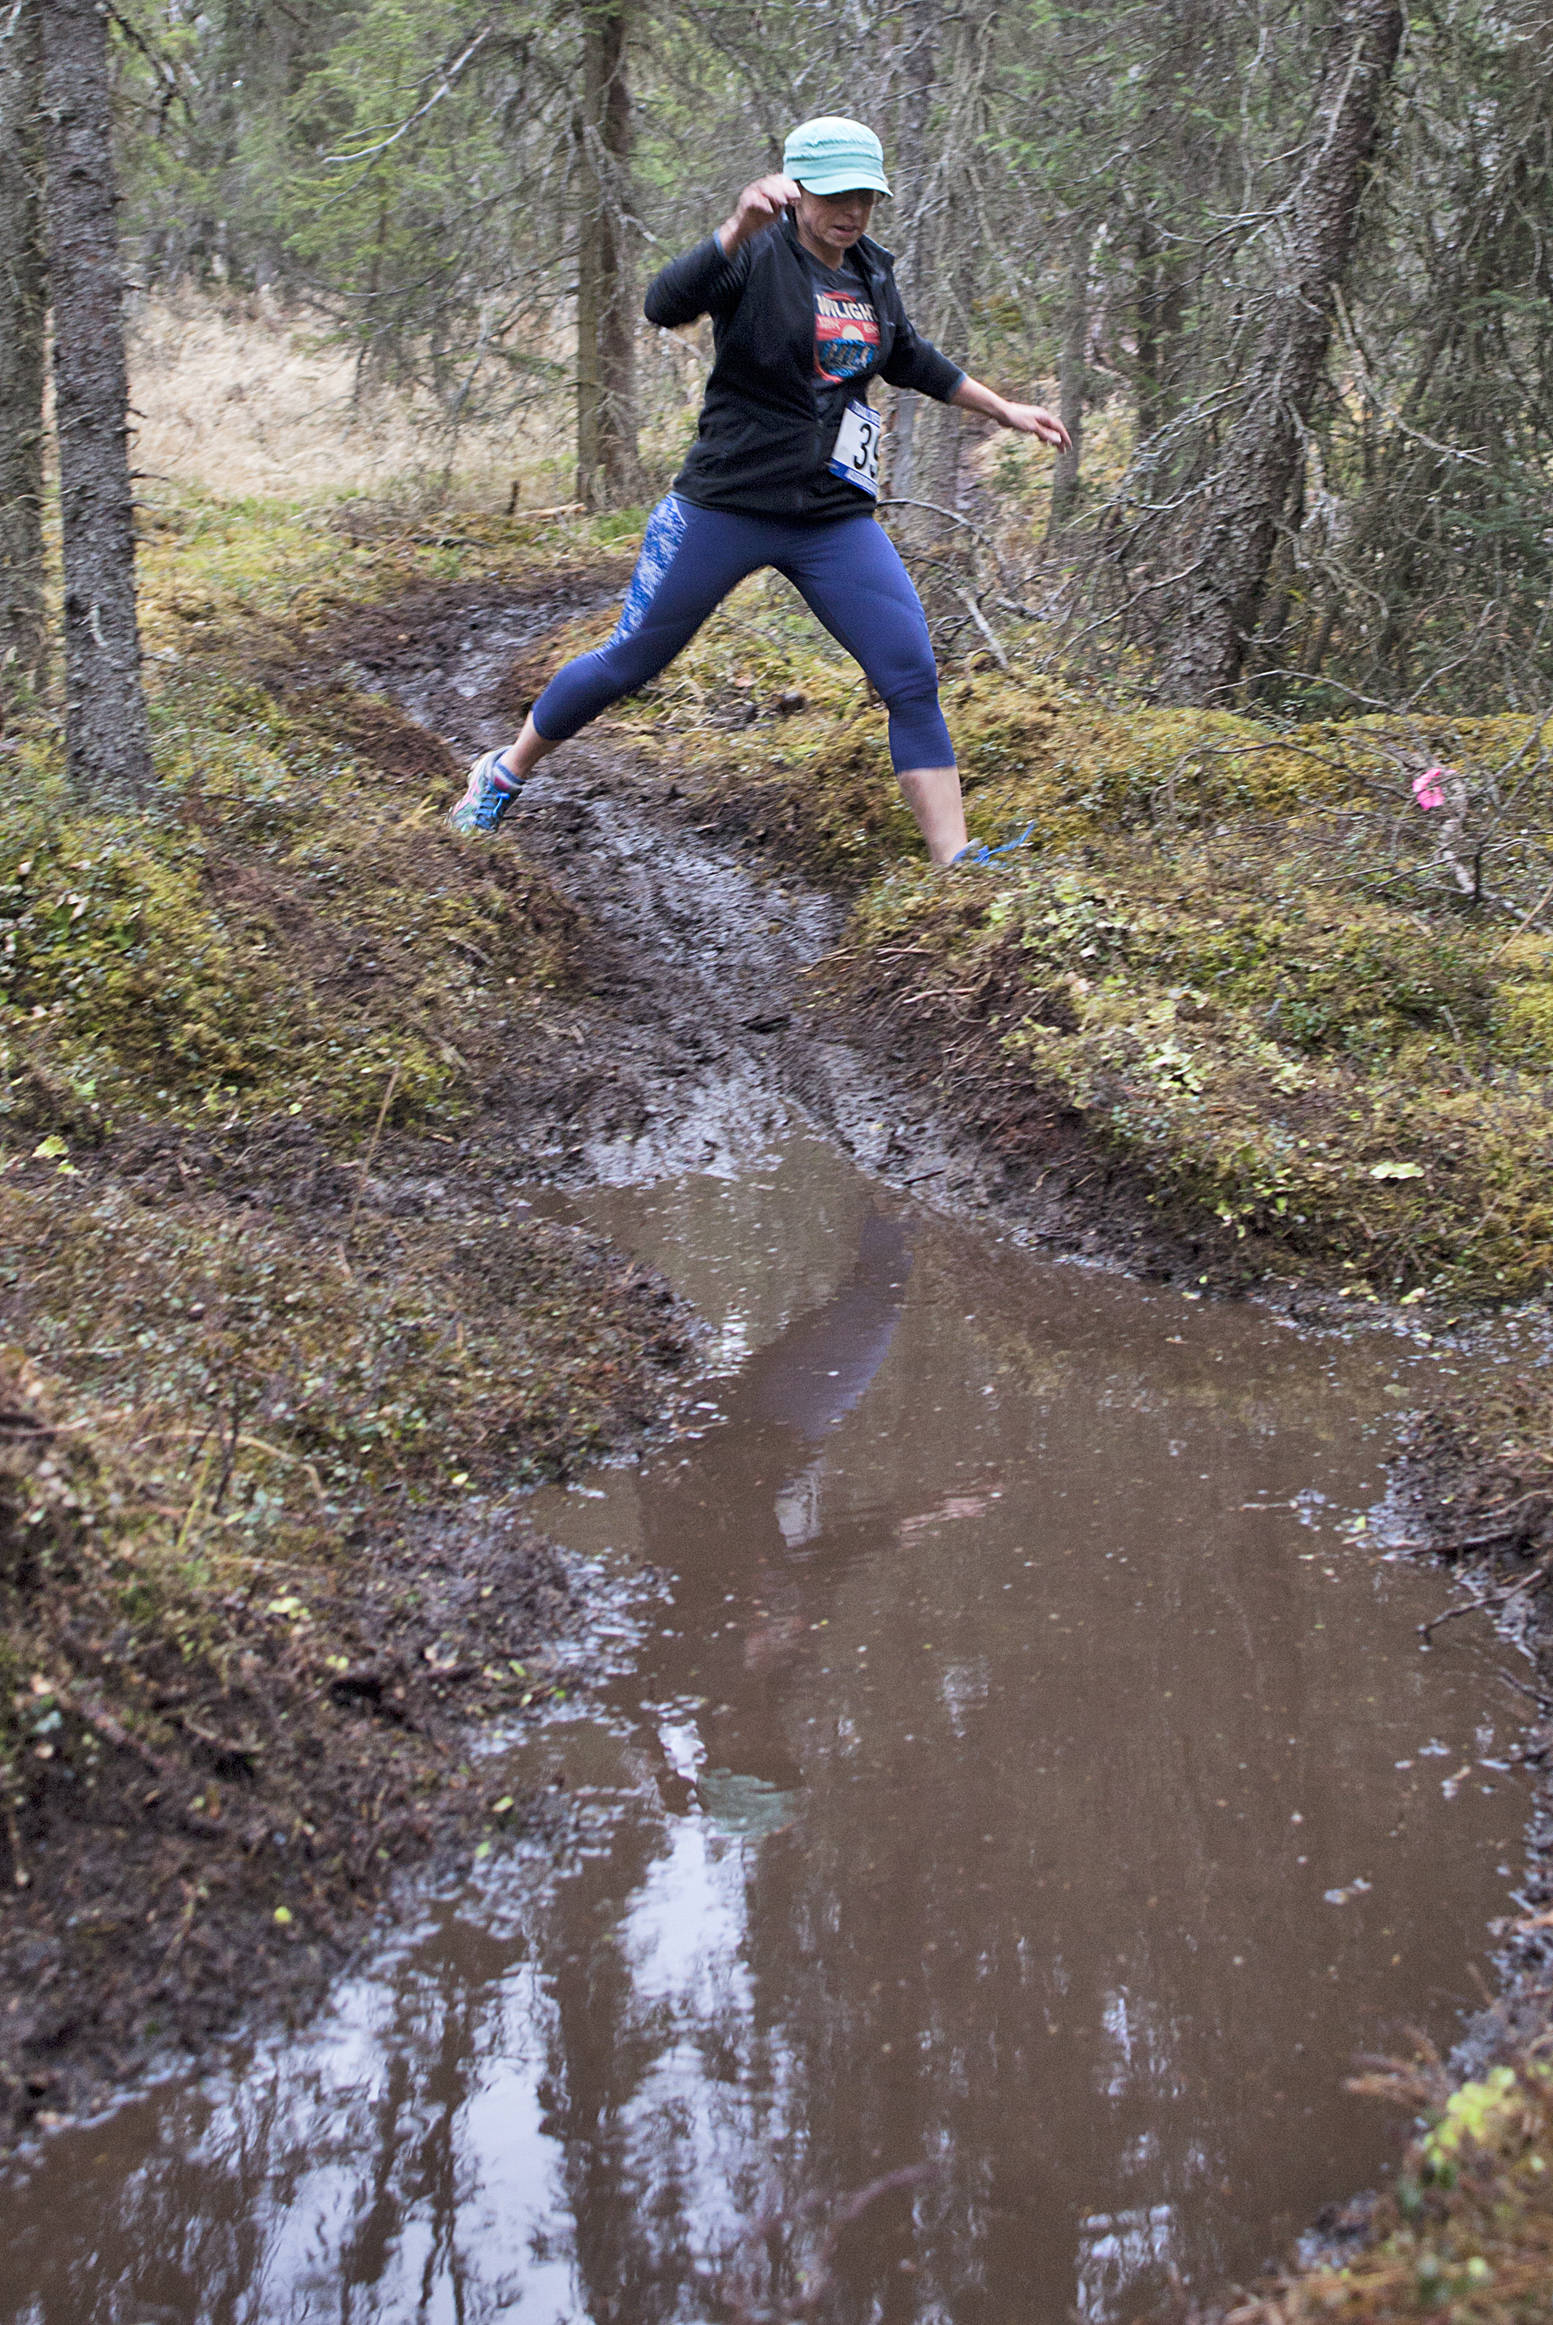 Patty Moran leaps from one side of a trail to the other during the Choose Your Weapon race on the Tsalteshi Trails in April 2015. (Clarion file photo)